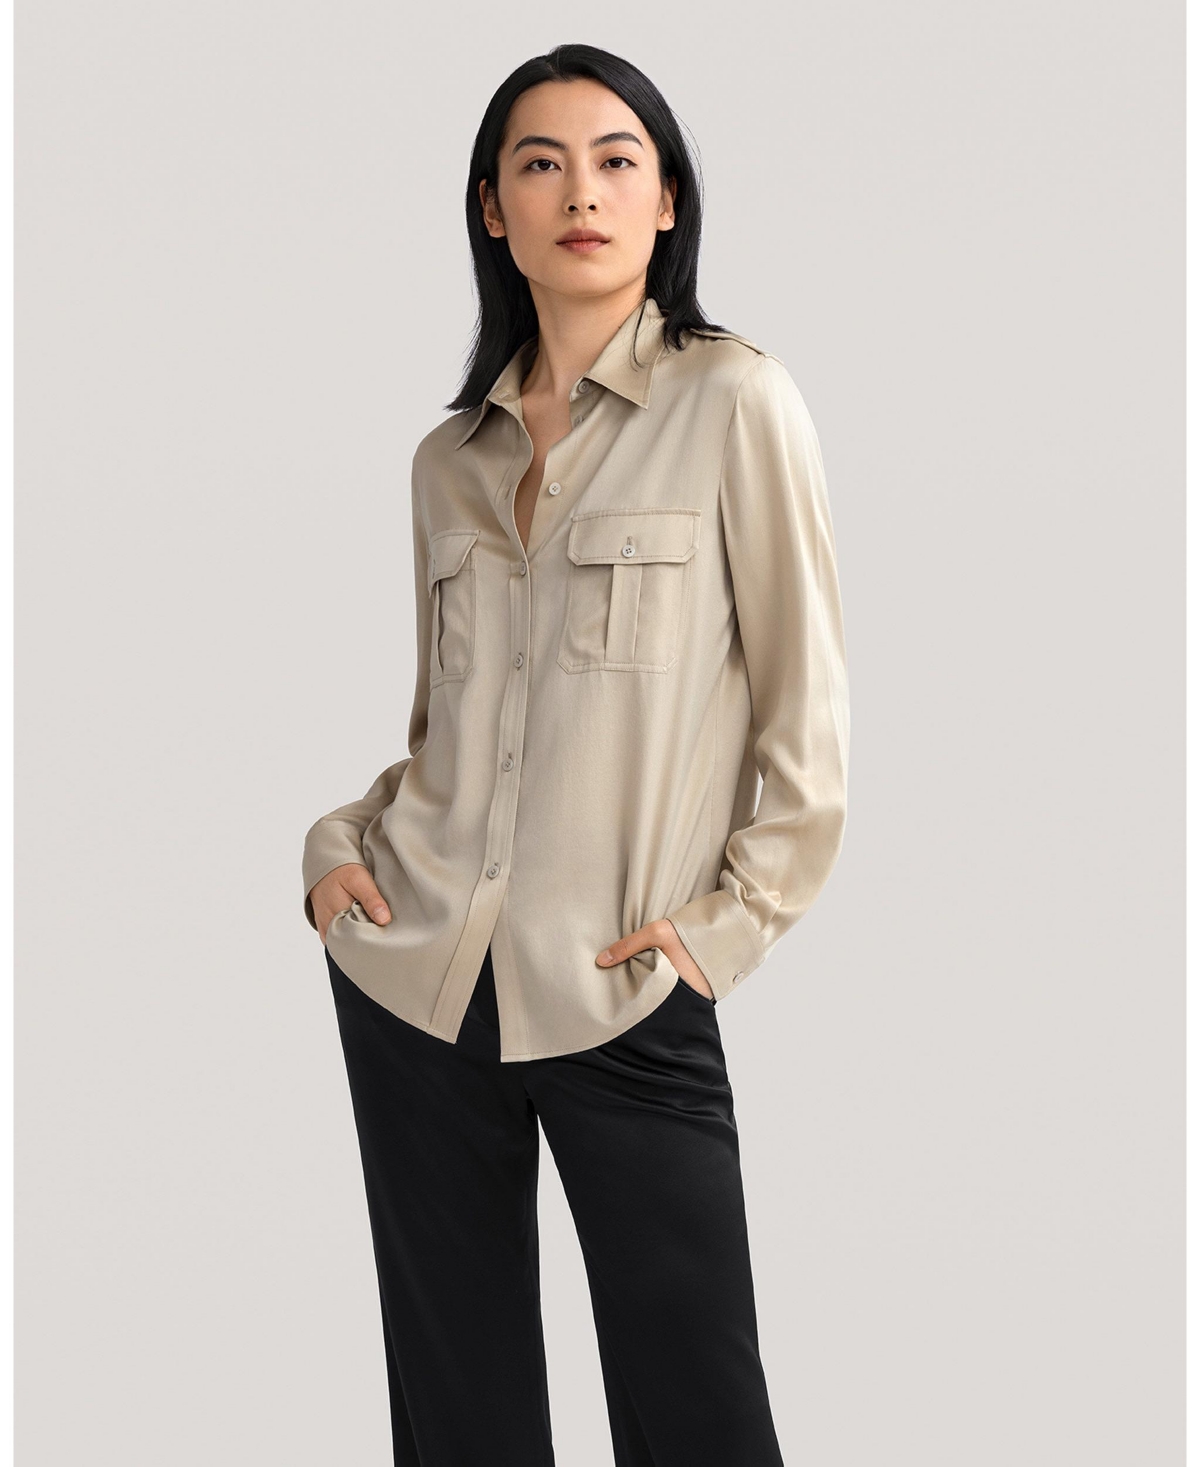 Sandwashed Silk Shirt With Epaulettes for Women - Apricot